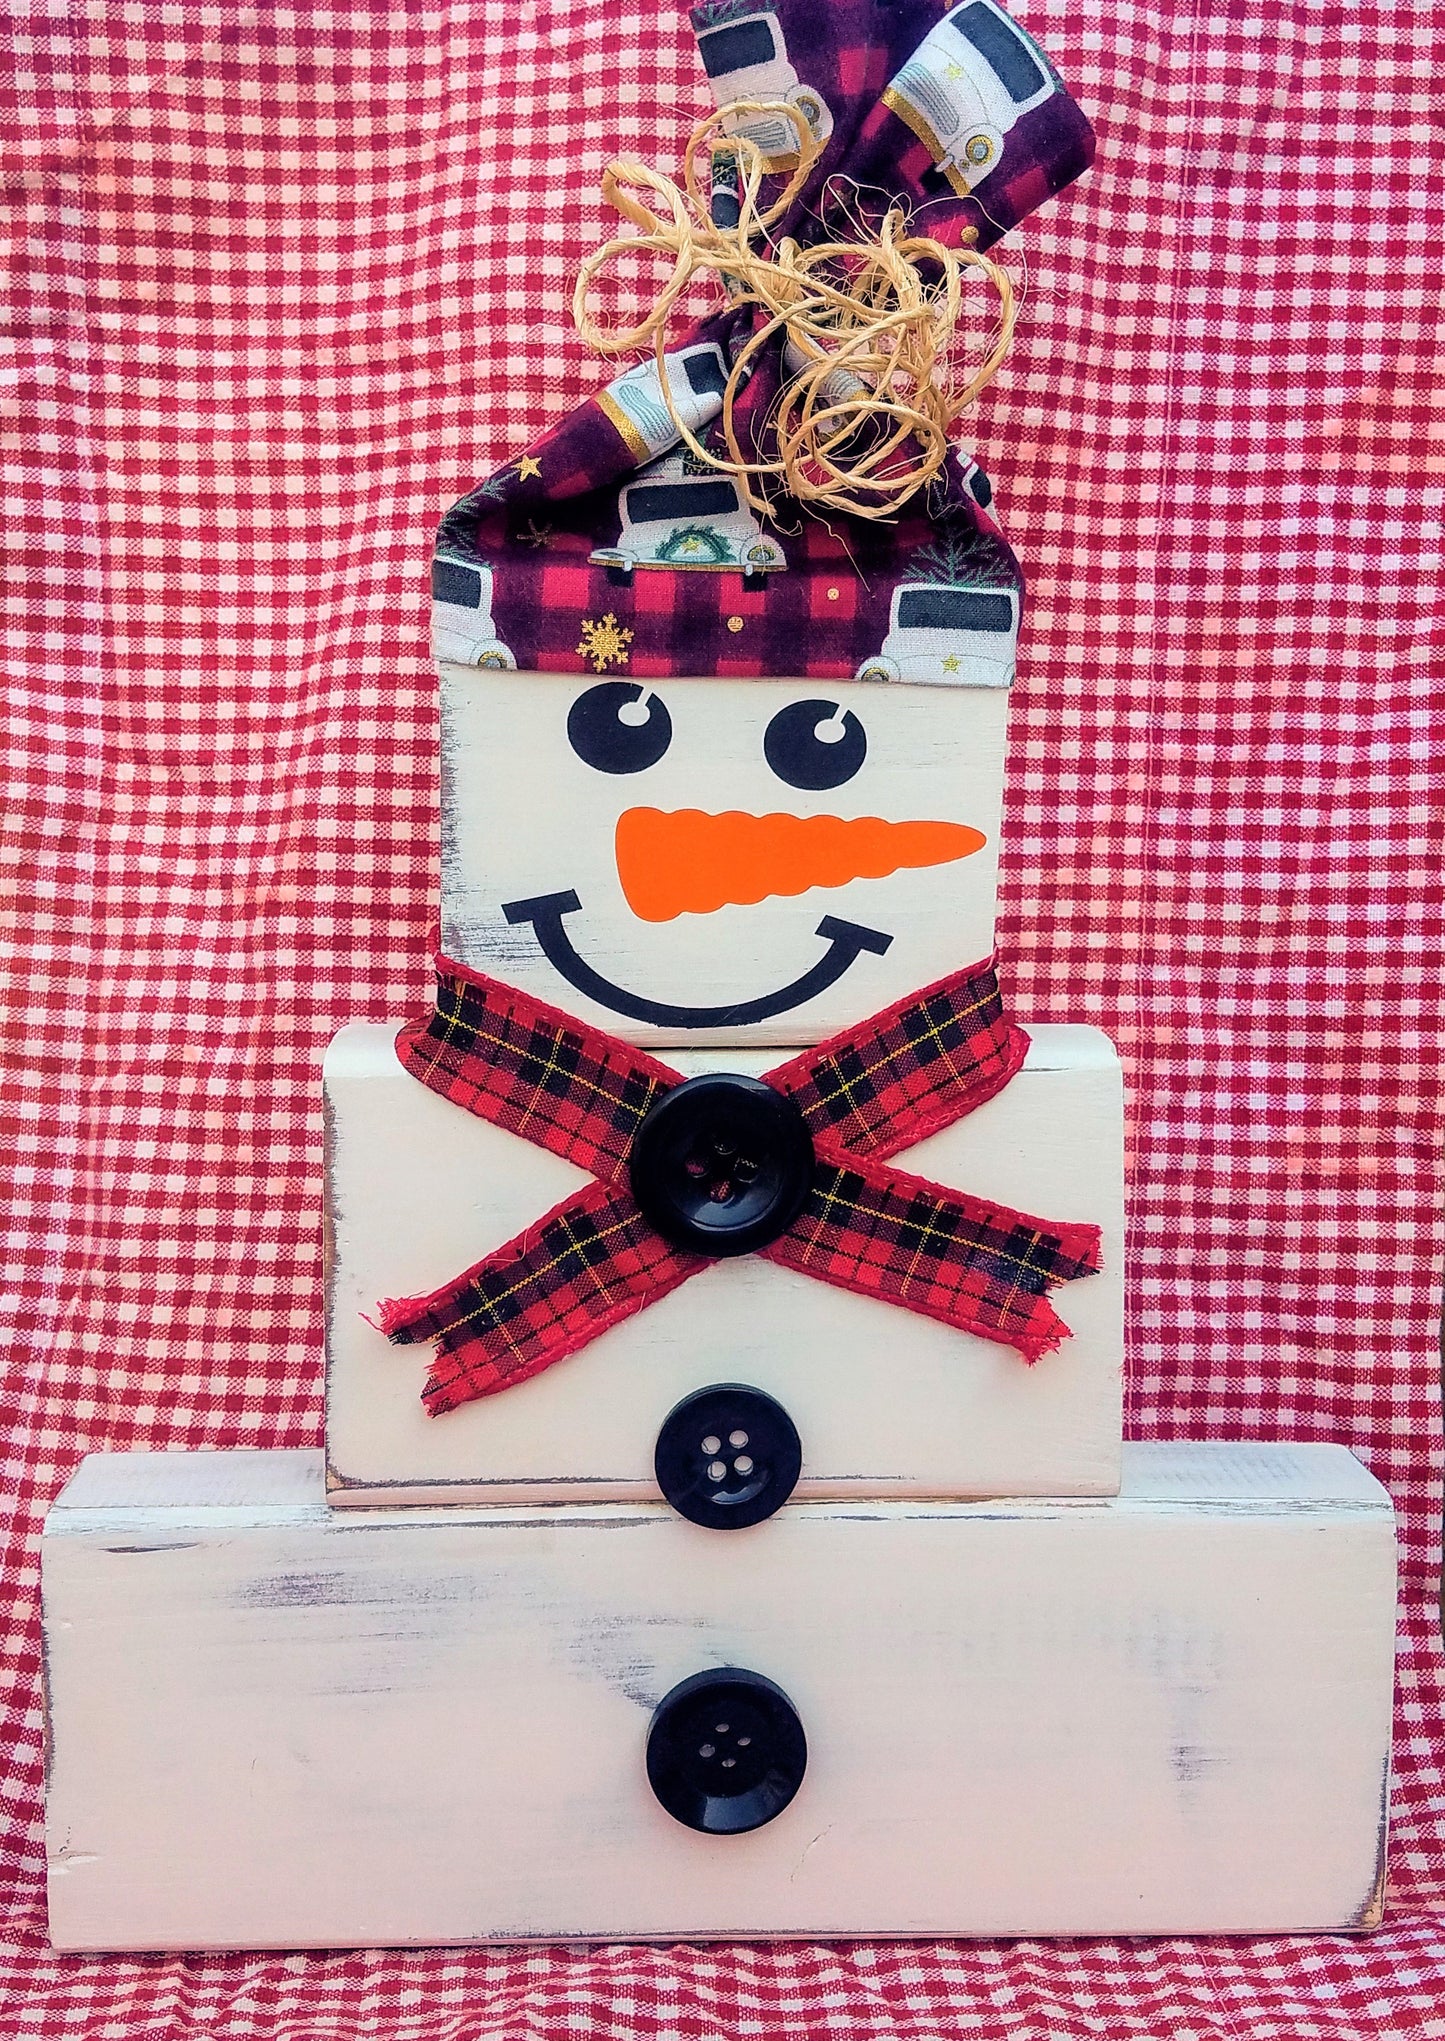 Farmhouse Vintage Real Wooden Block Snowman with Hat, Scarf and Buttons